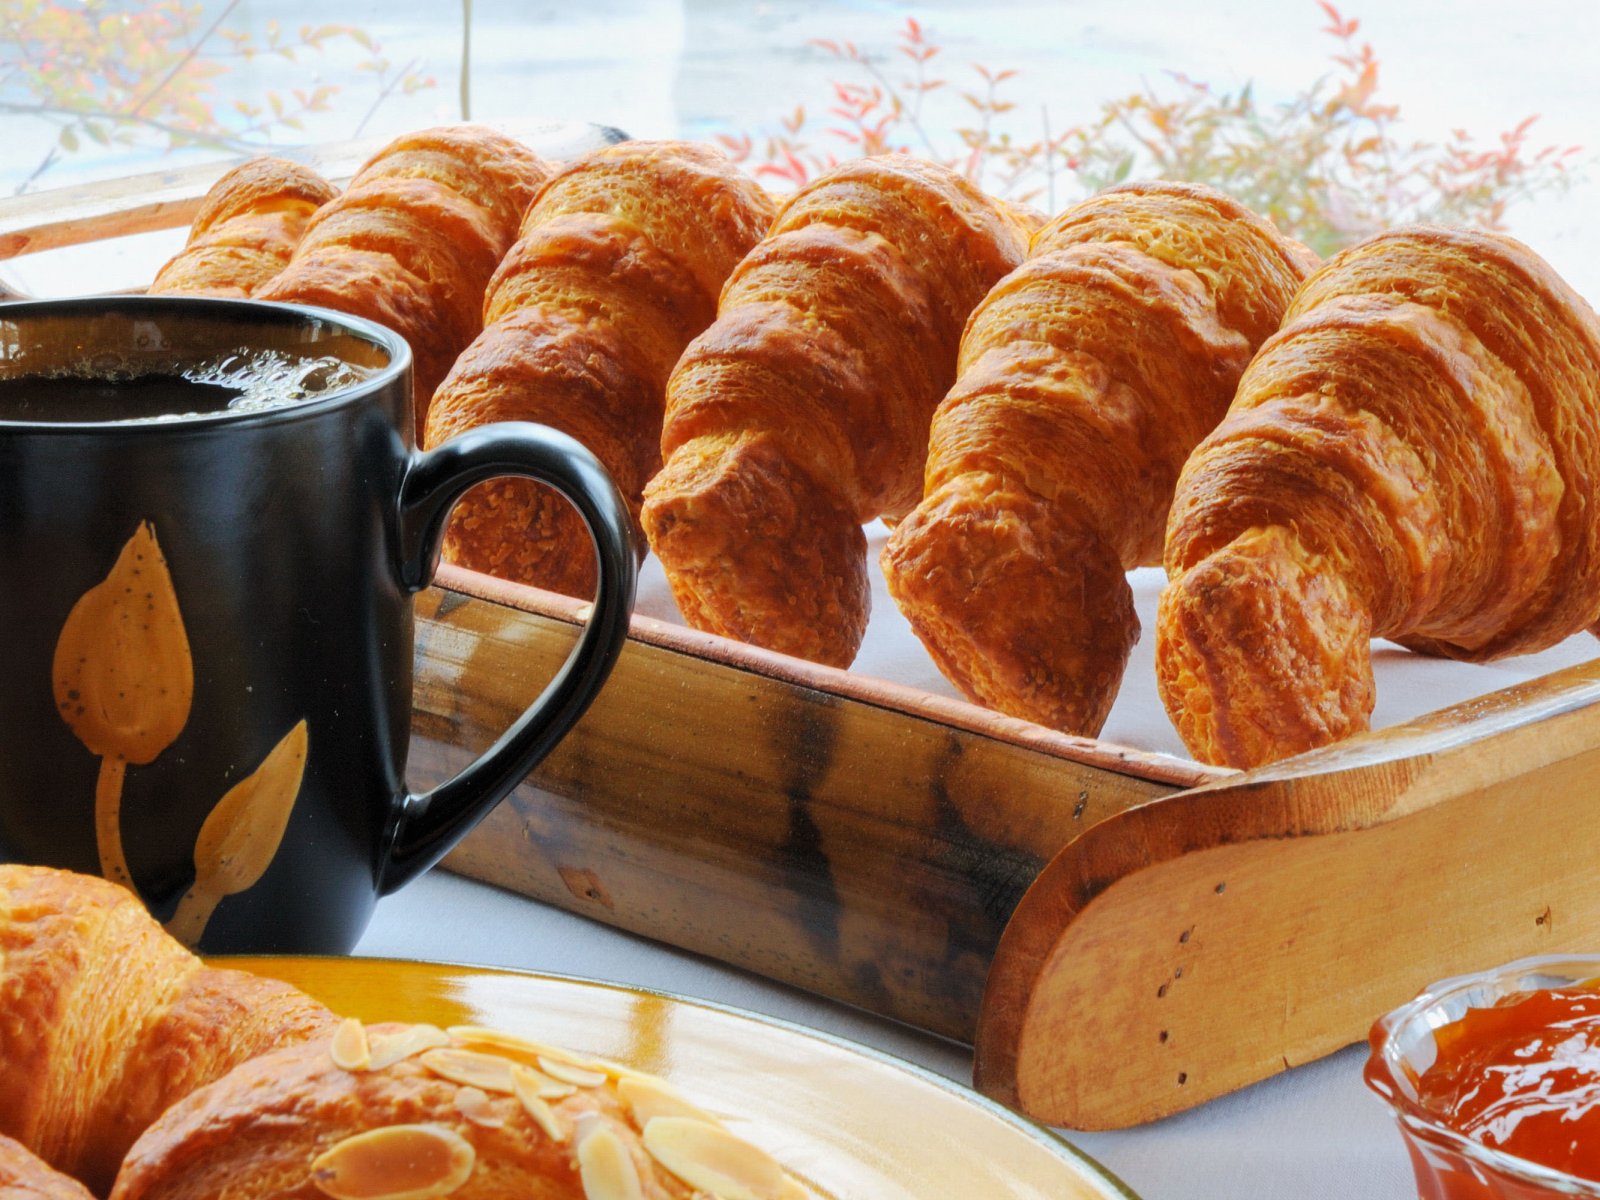 How to taste croissants for a breakfast in Paris